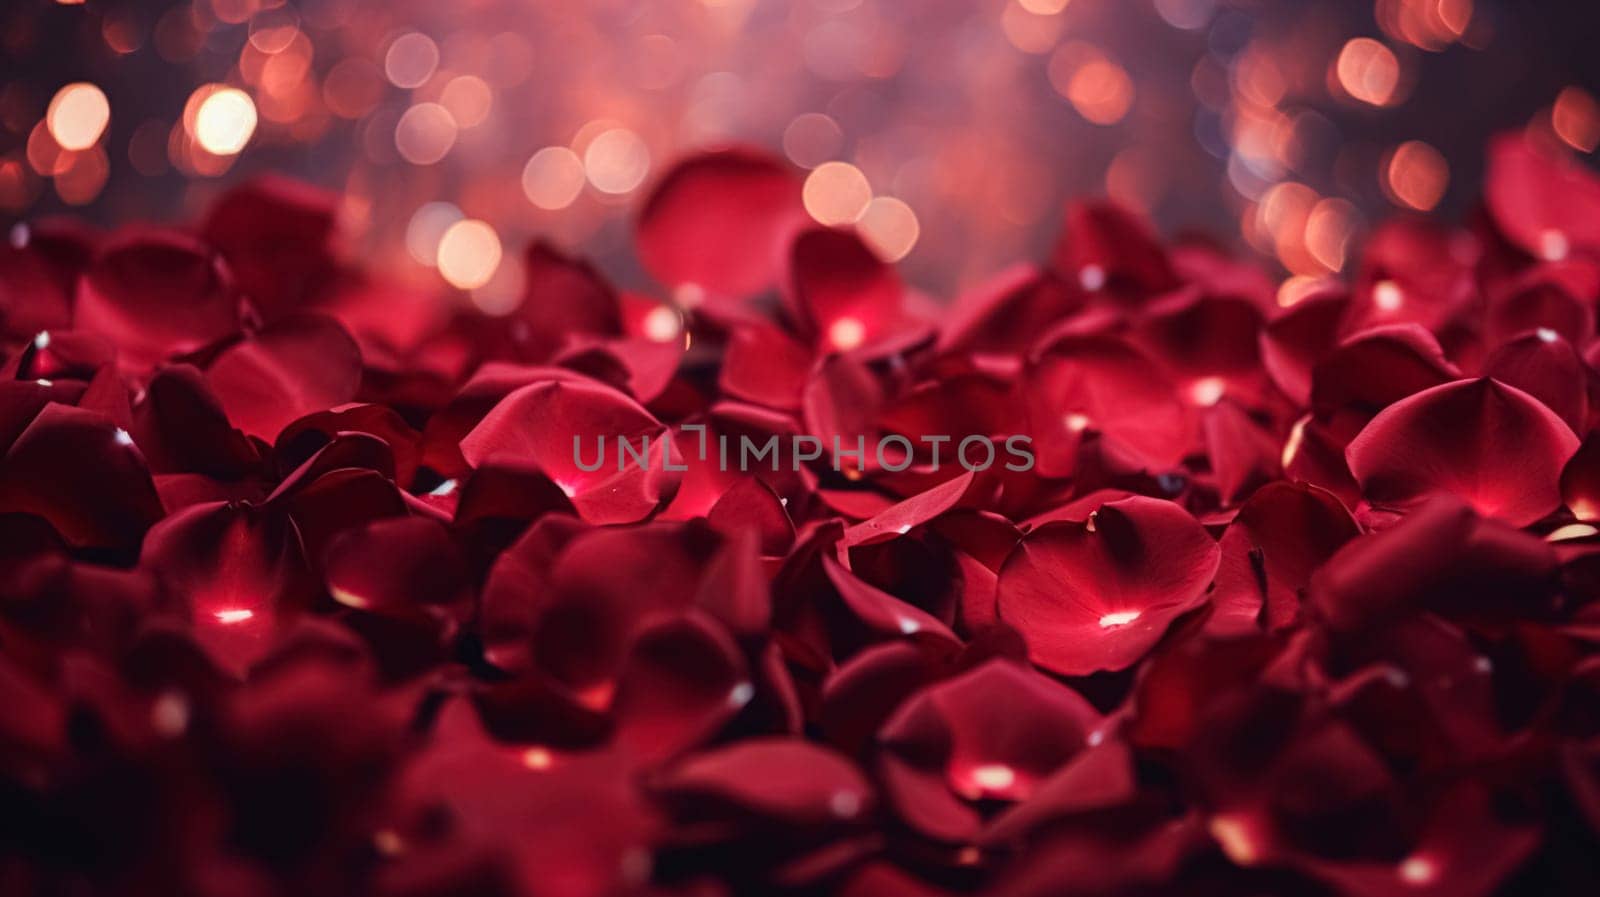 Valentines day background with red rose petals and bokeh lights, symbol of love, romance and commitment inspiration